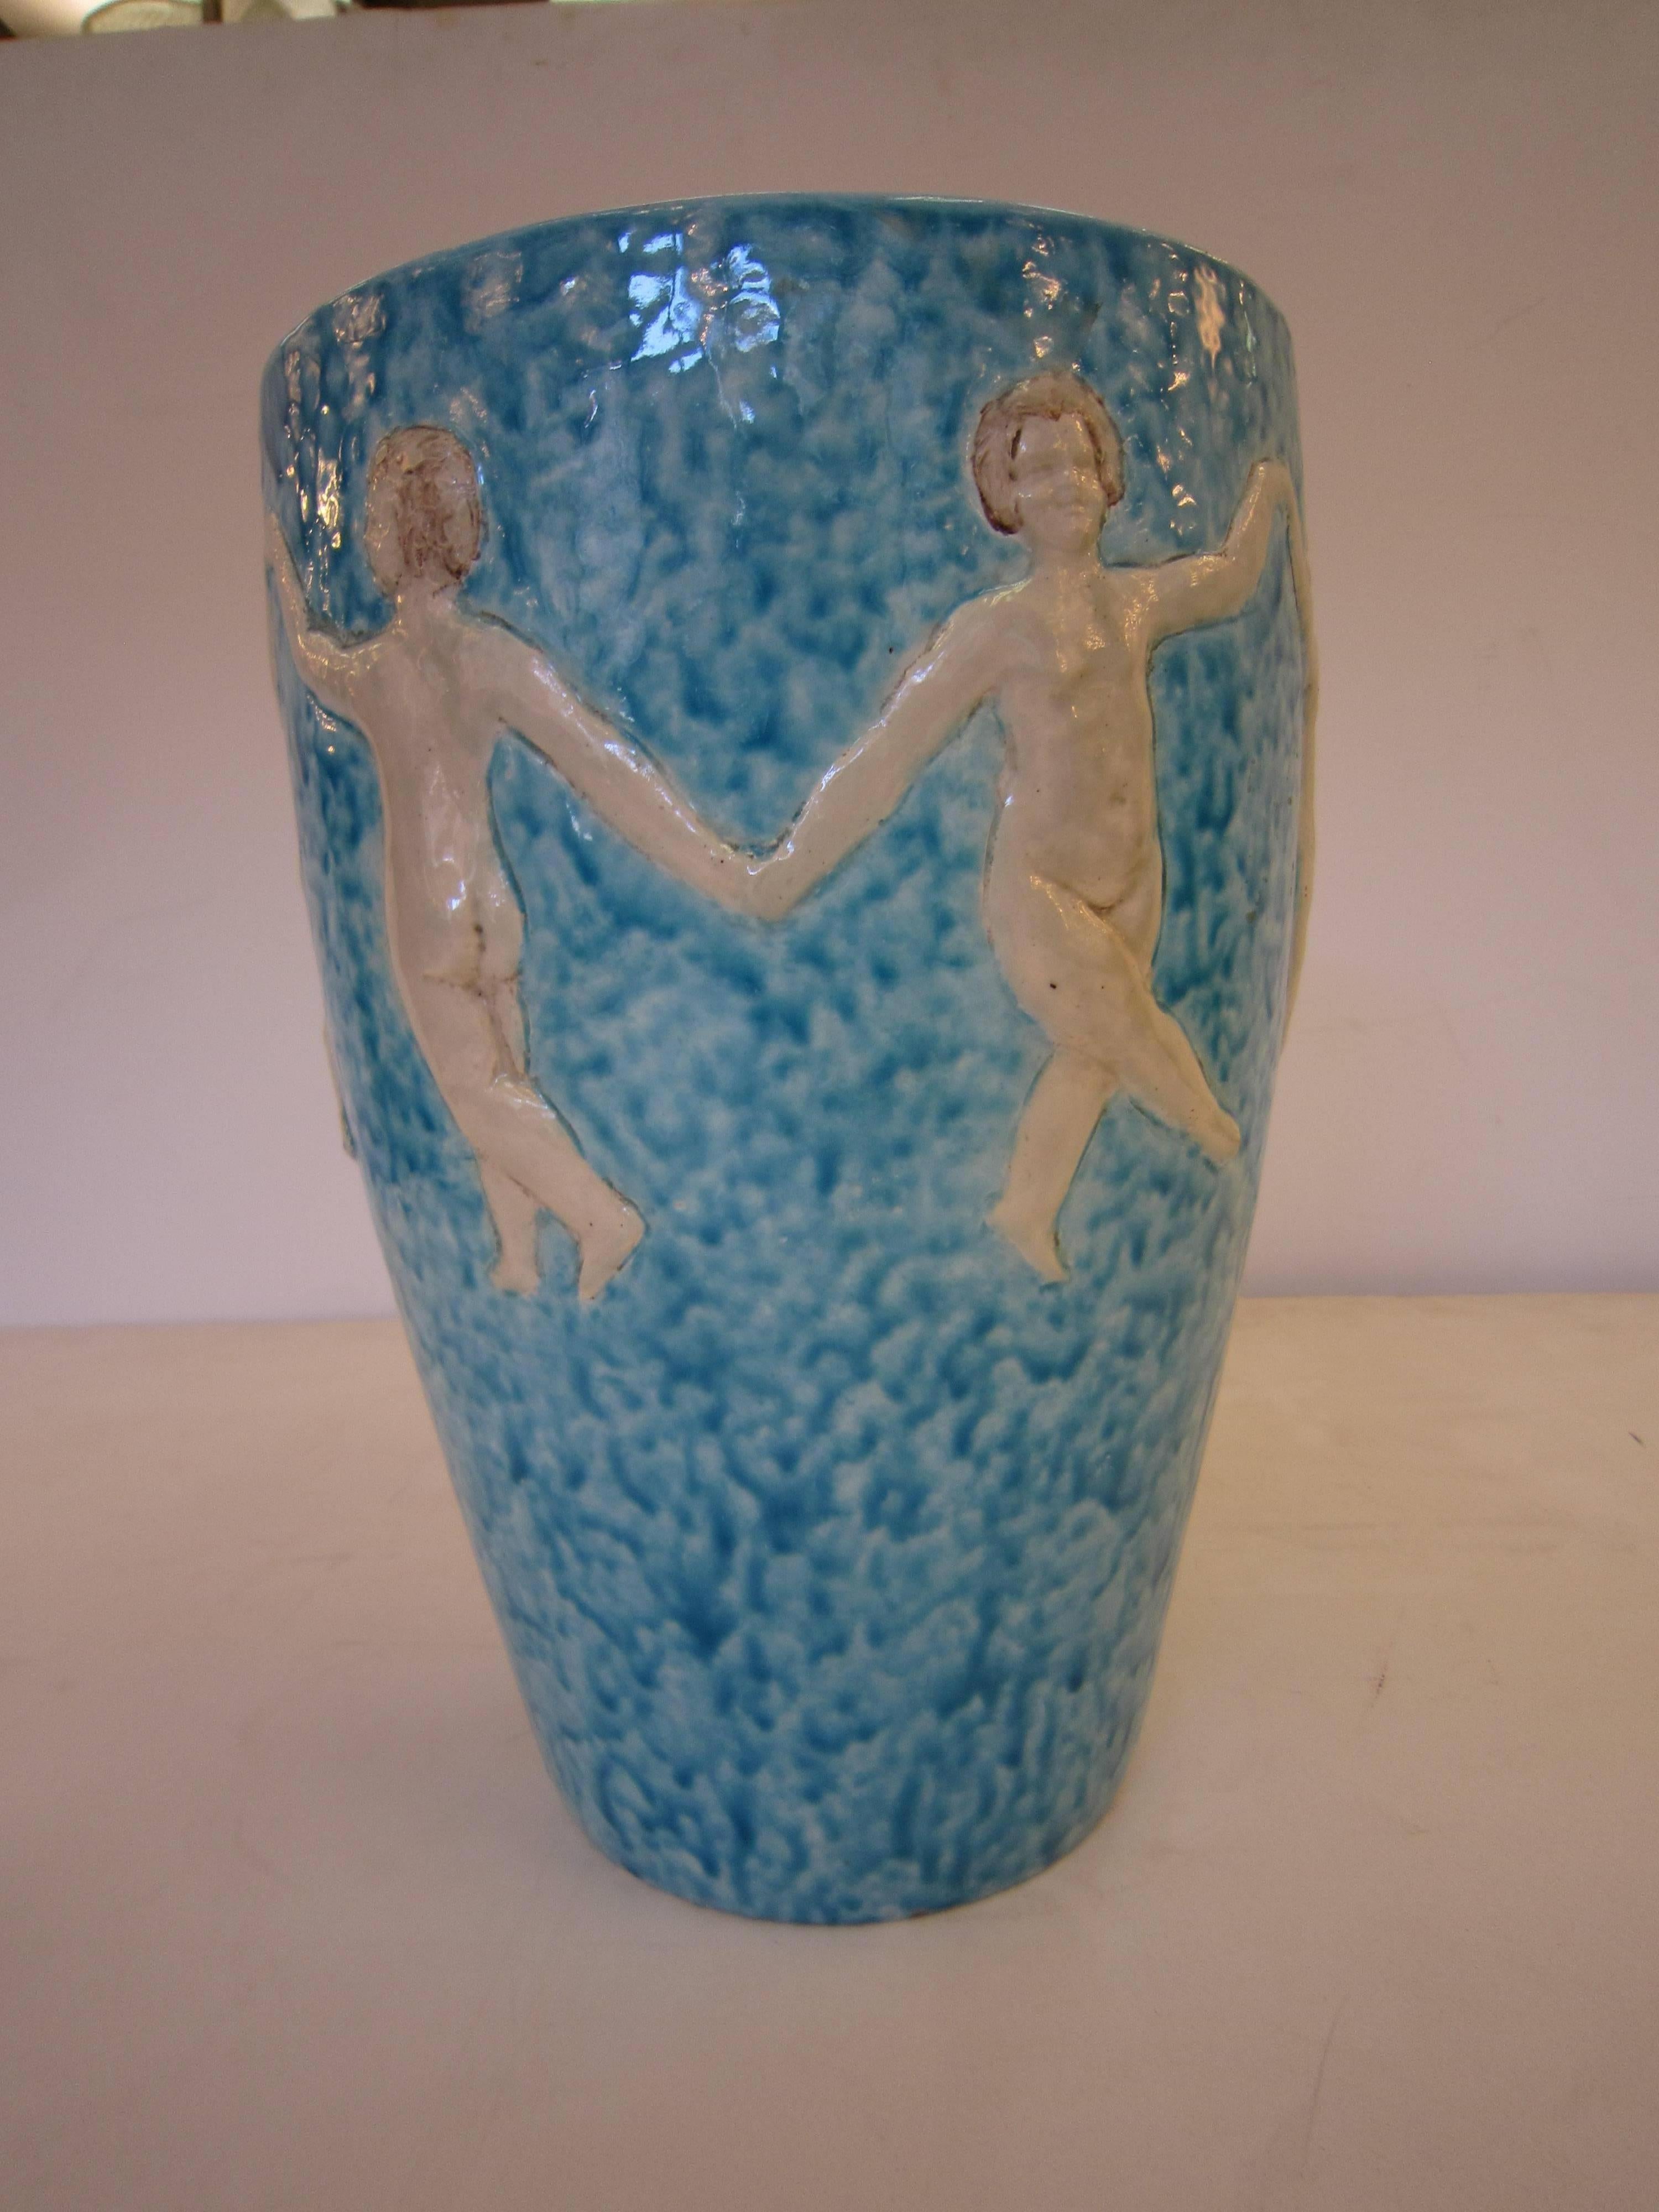 20th Century French Art Deco Turquoise Blue Pottery Vase with Children, R. Maynard